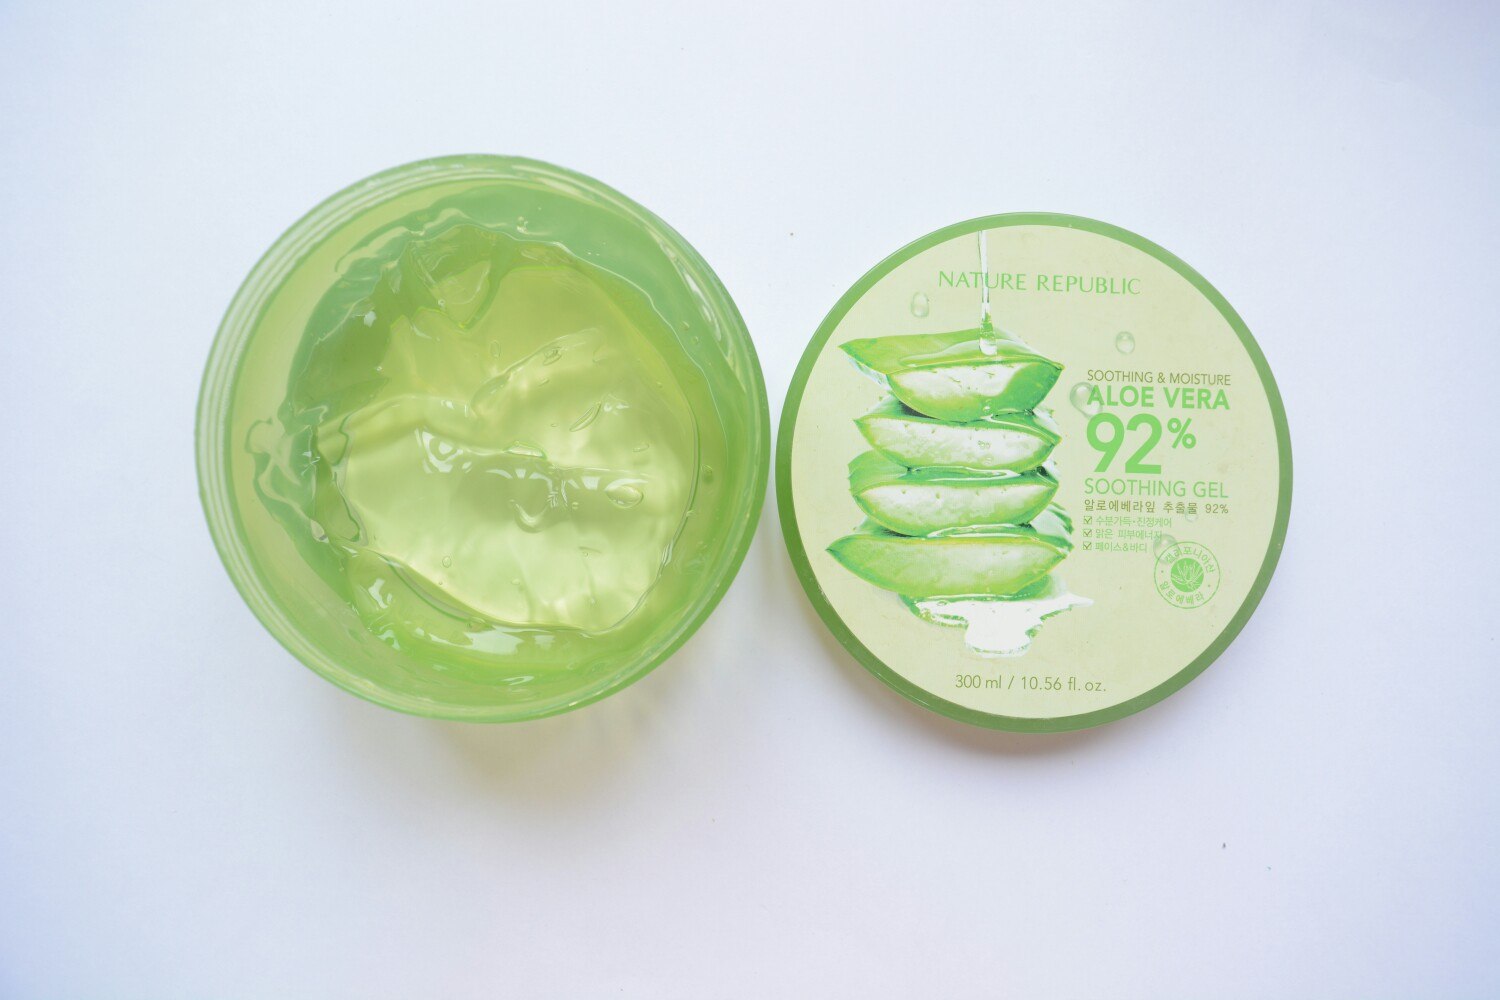 Nature Republic Soothing and Moisture Aloe Vera Soothing Gel